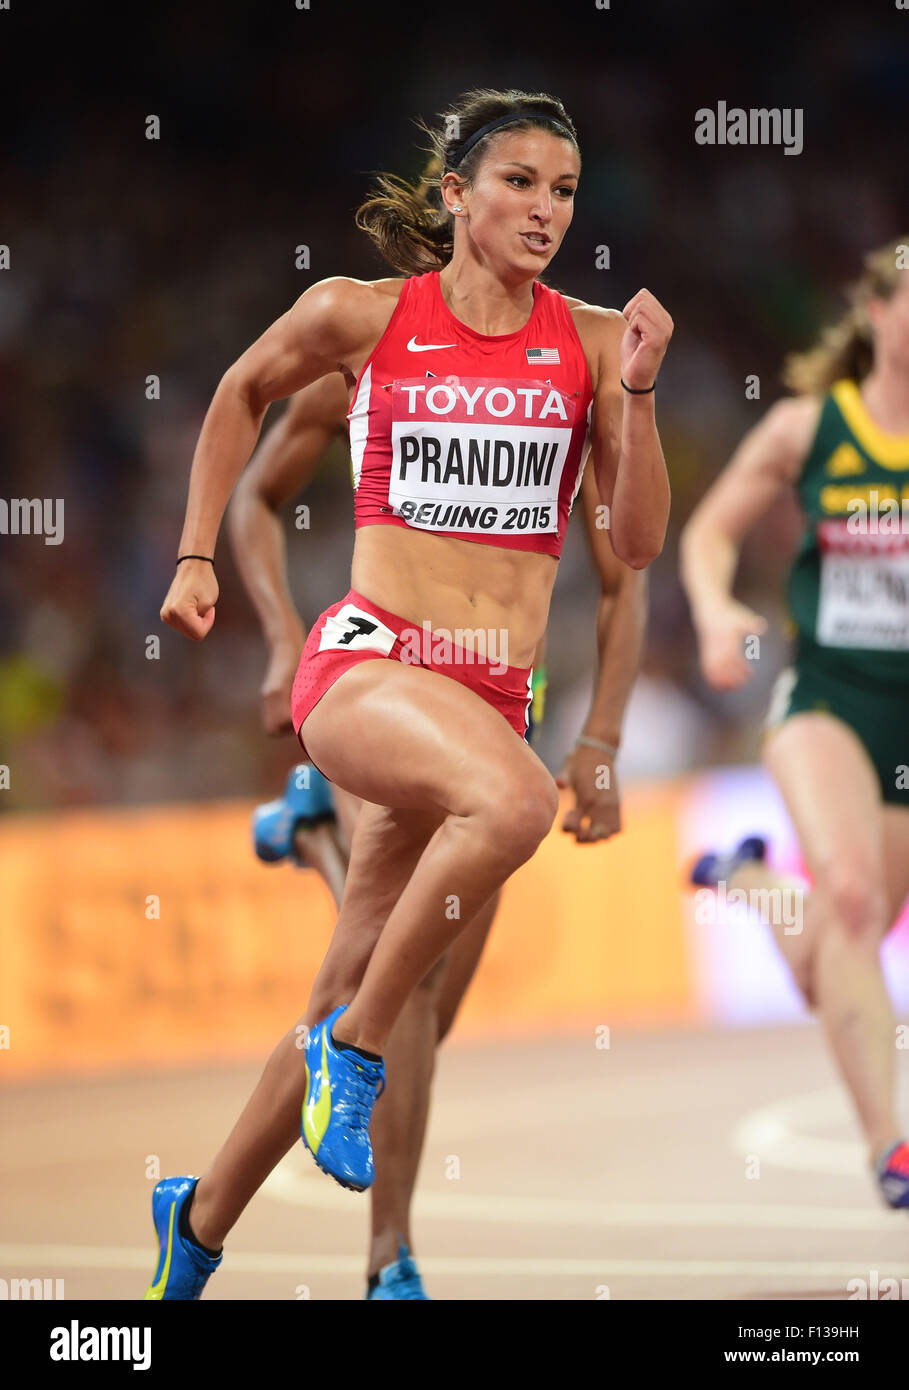 Beijing China 26th Aug 2015 Jenna Prandini Of The United States Competes During The Women S 200m Heats At The 2015 Iaaf World Championships At The Bird S Nest National Stadium In Beijing Capital